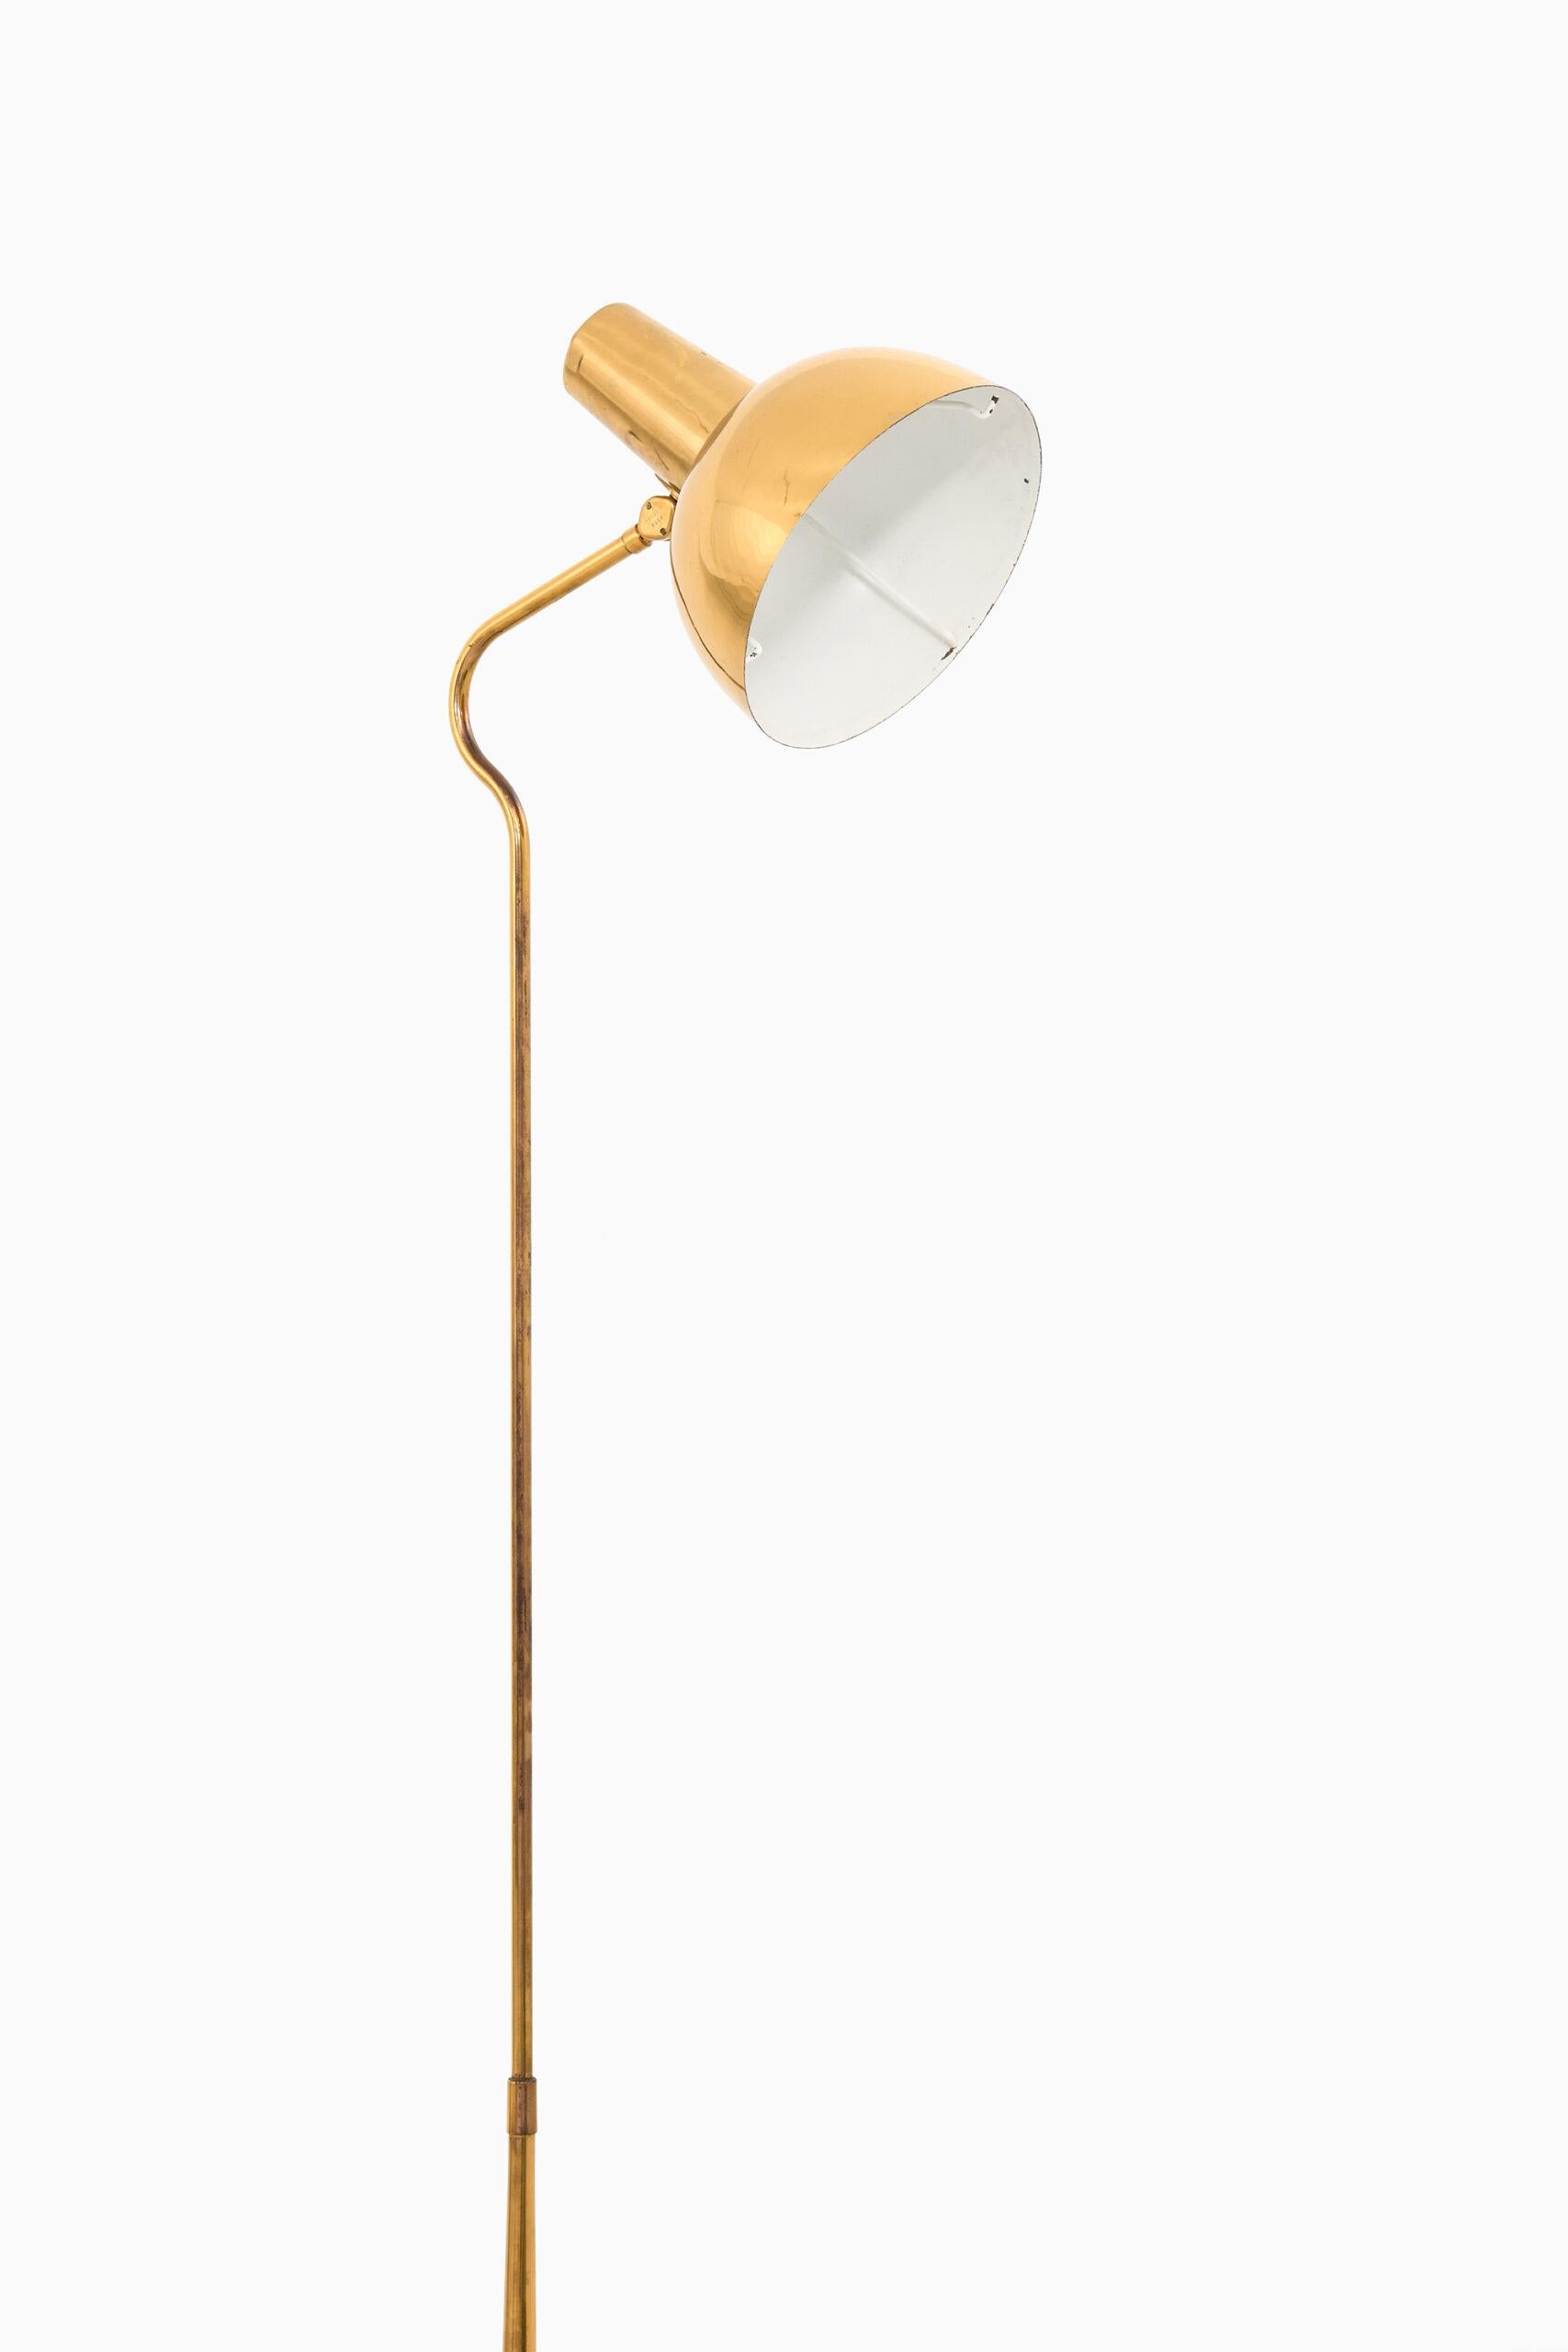 Floor Lamp Produced by ASEA in Sweden In Good Condition For Sale In Limhamn, Skåne län